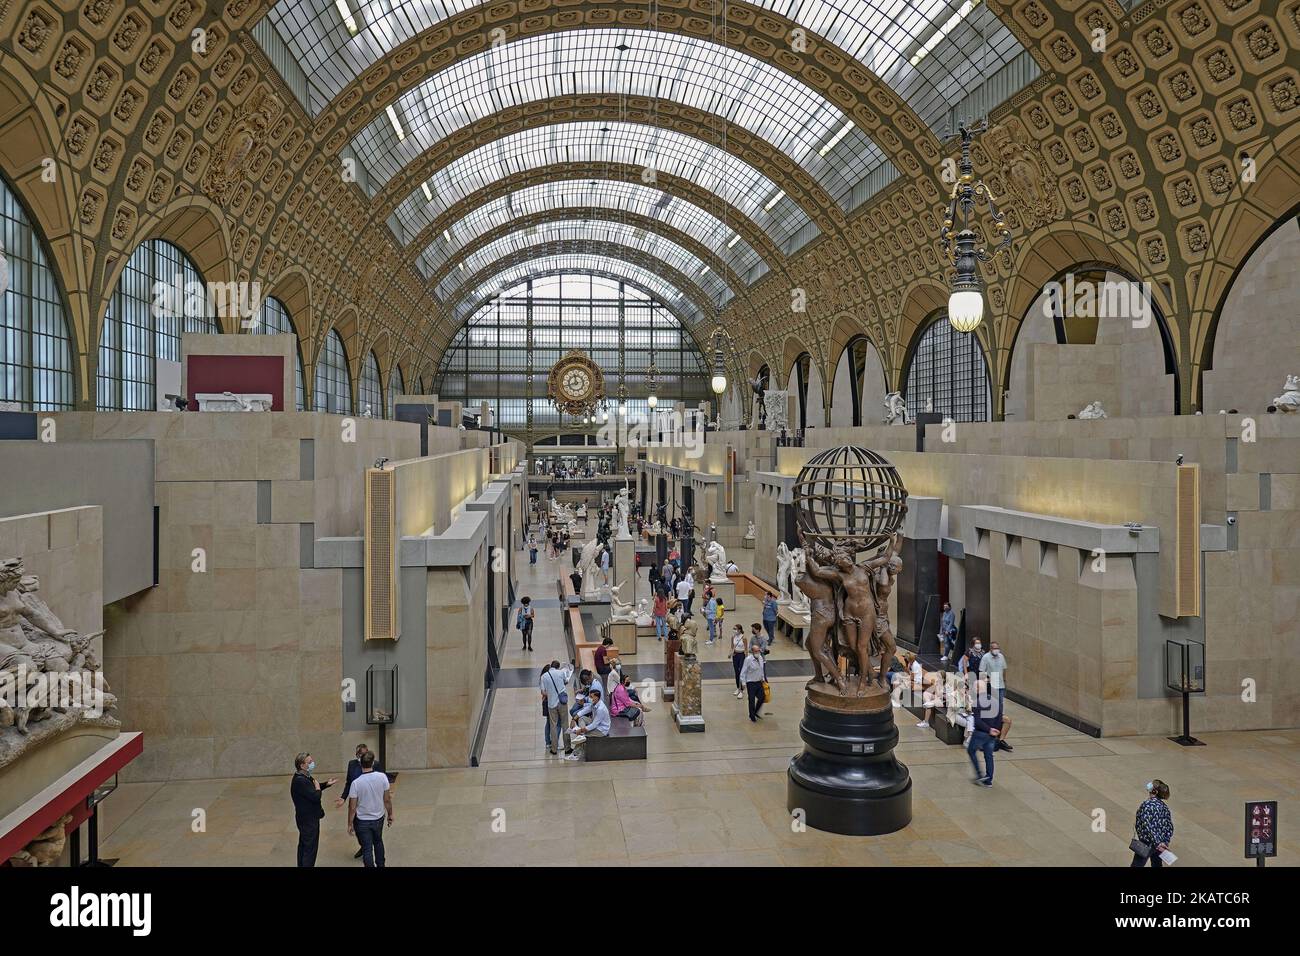 France, Paris, Musee d'Orsay  housed in the former Gare d'Orsay, a Beaux-Arts railway station. t houses the largest collection of Impressionist and po Stock Photo